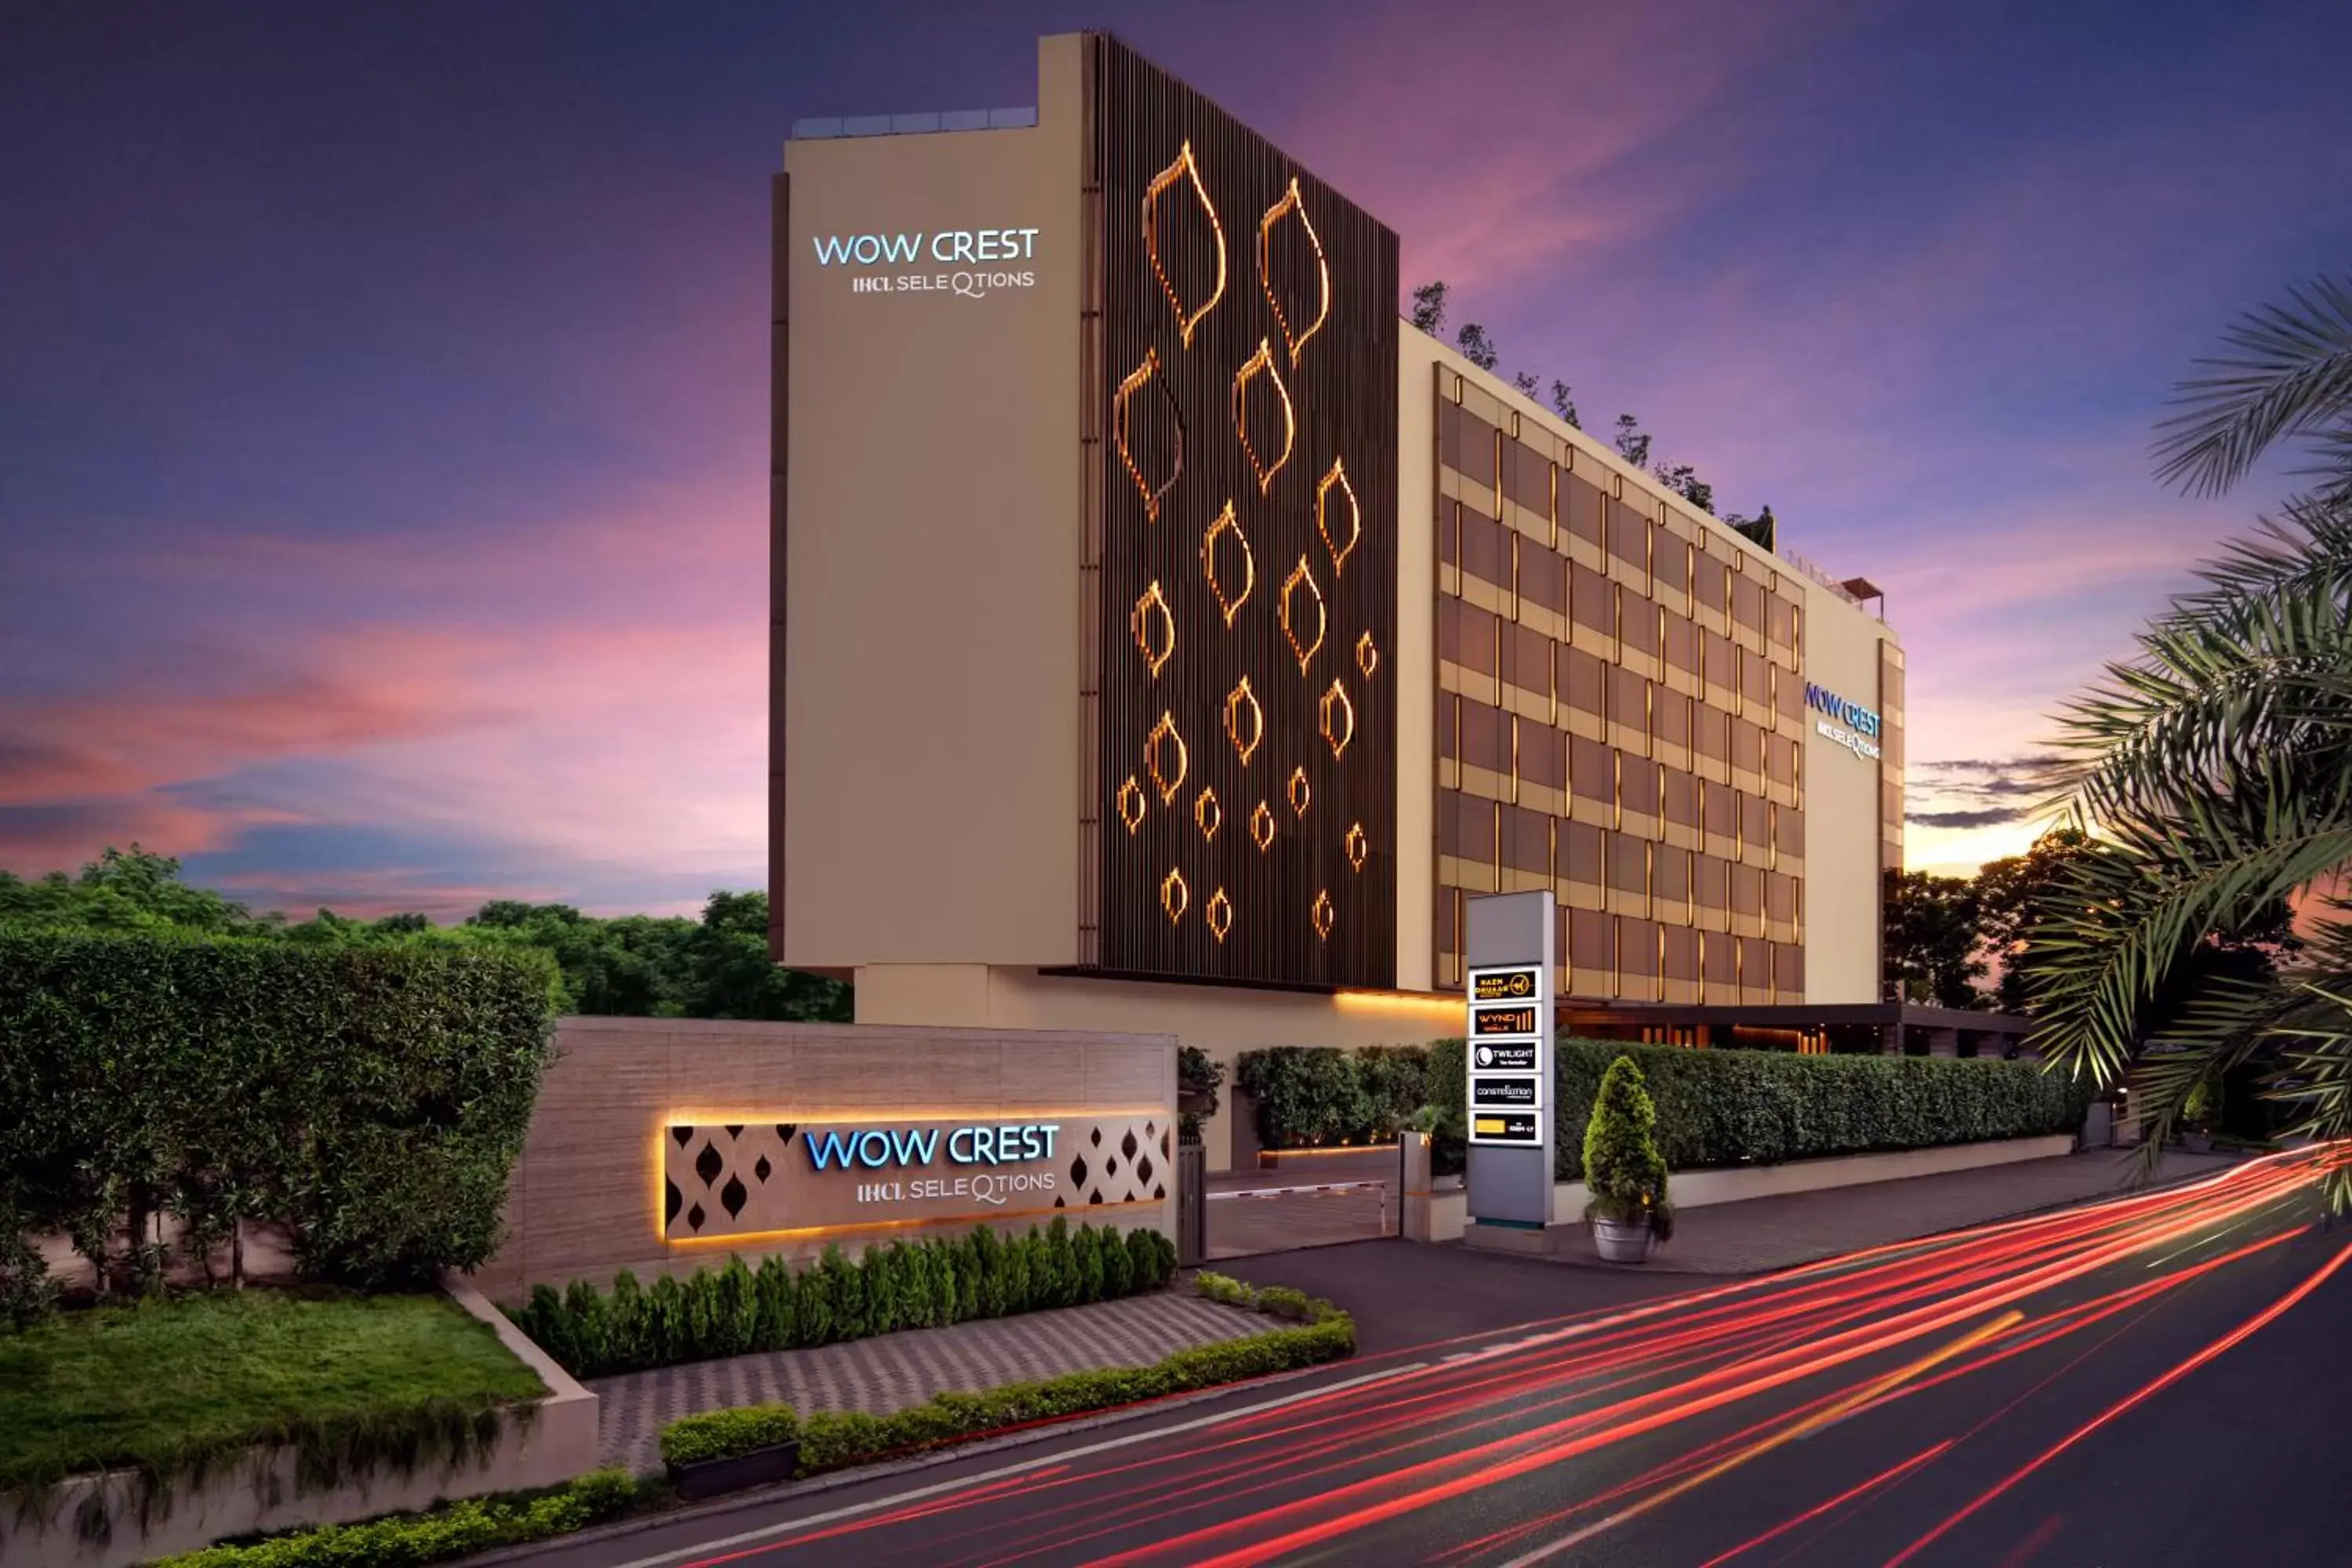 Property Building in Wow Crest, Indore - IHCL SeleQtions